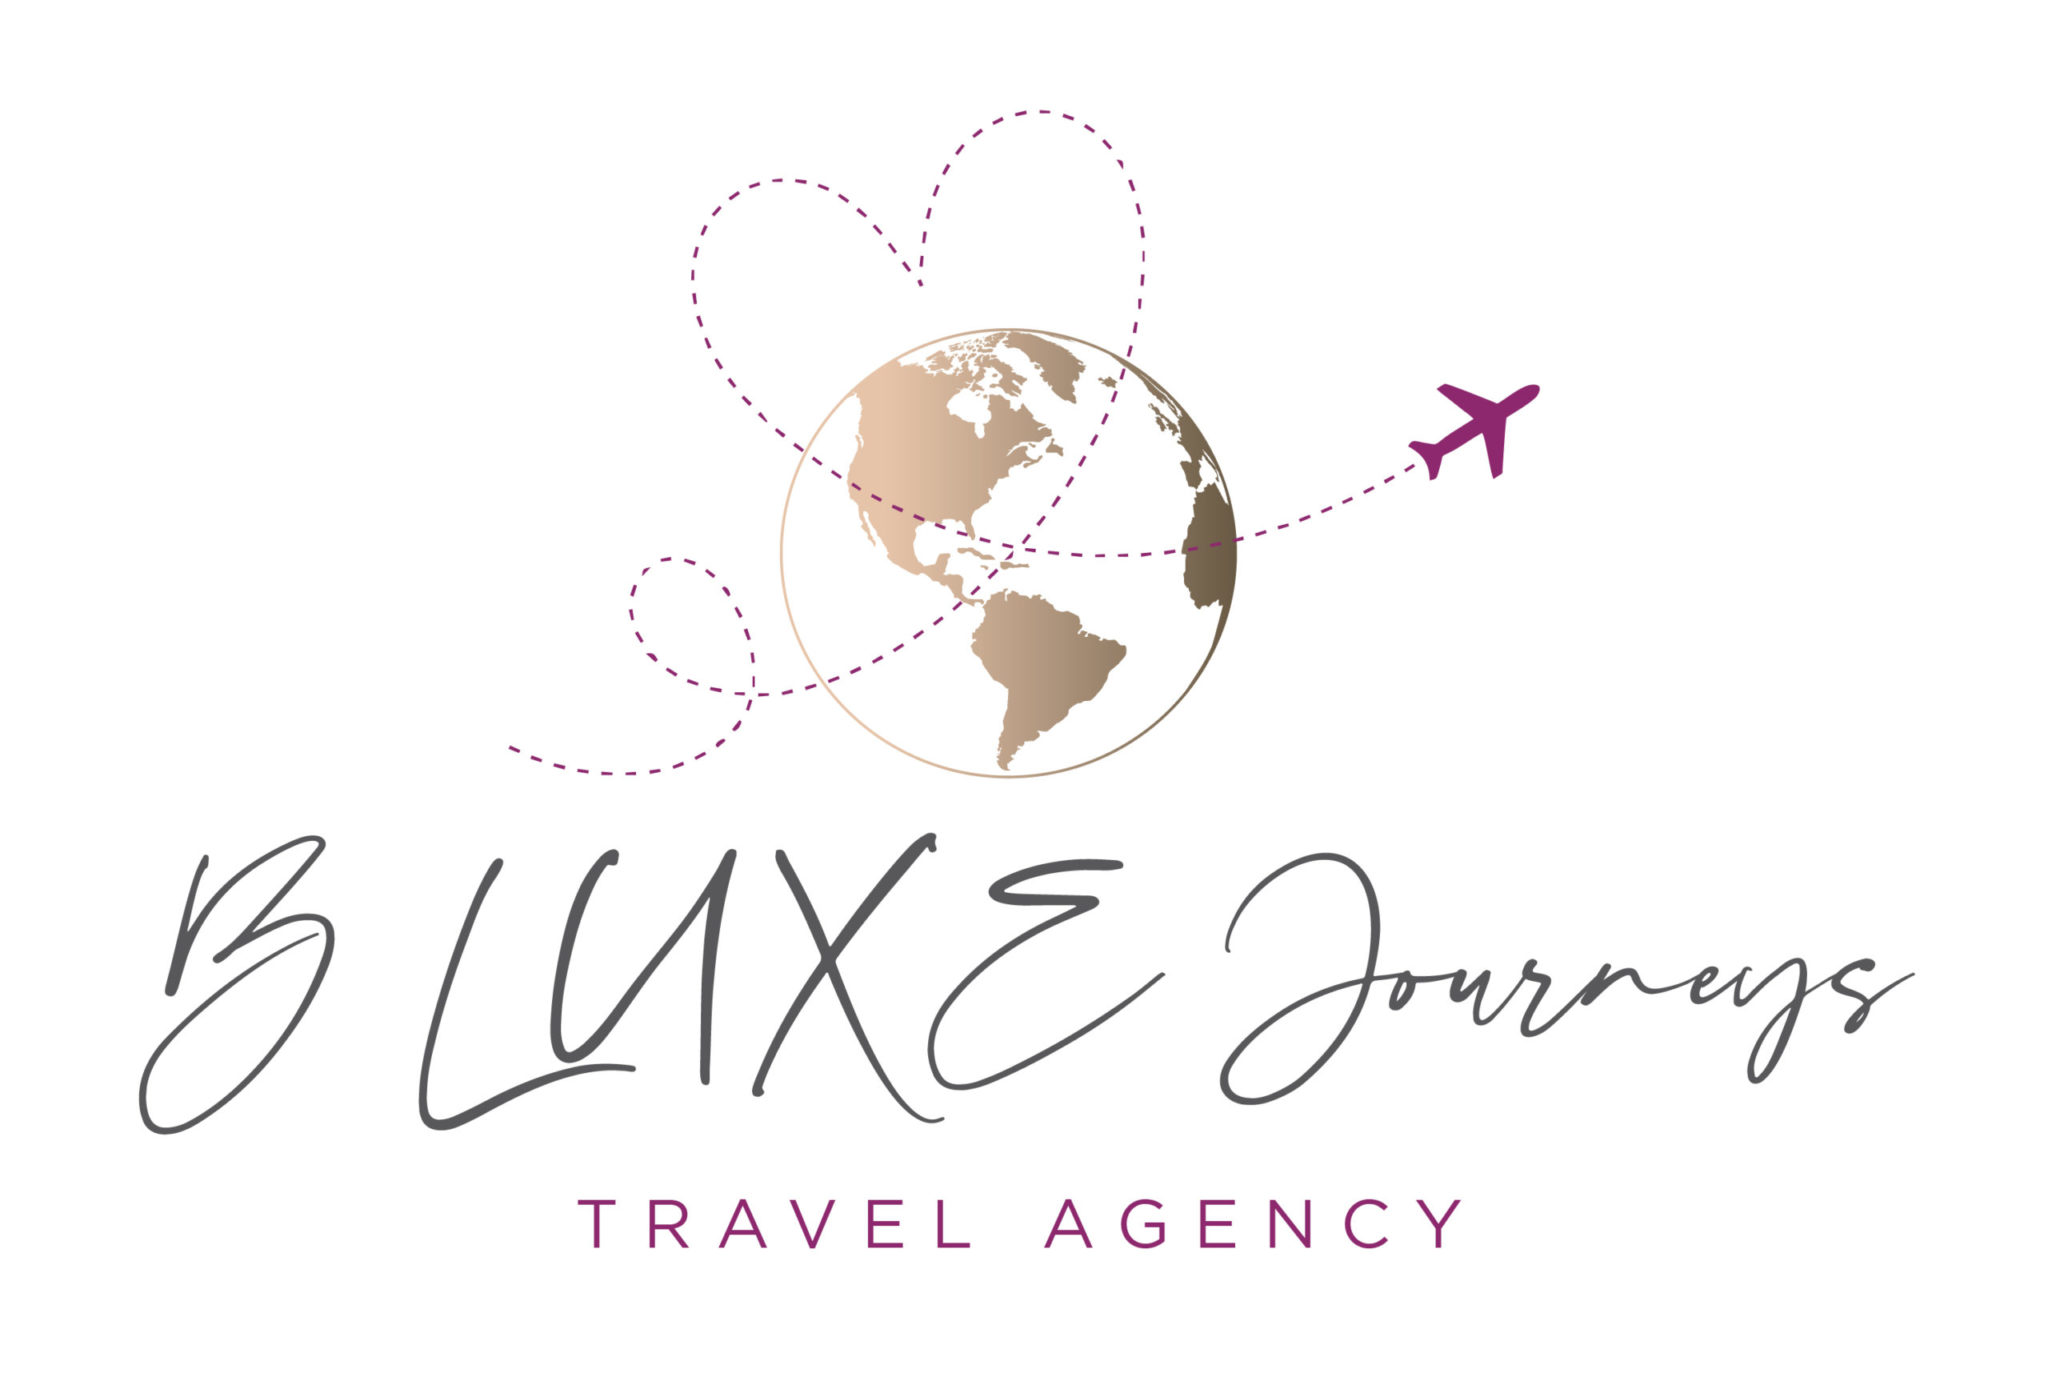 b luxe travel